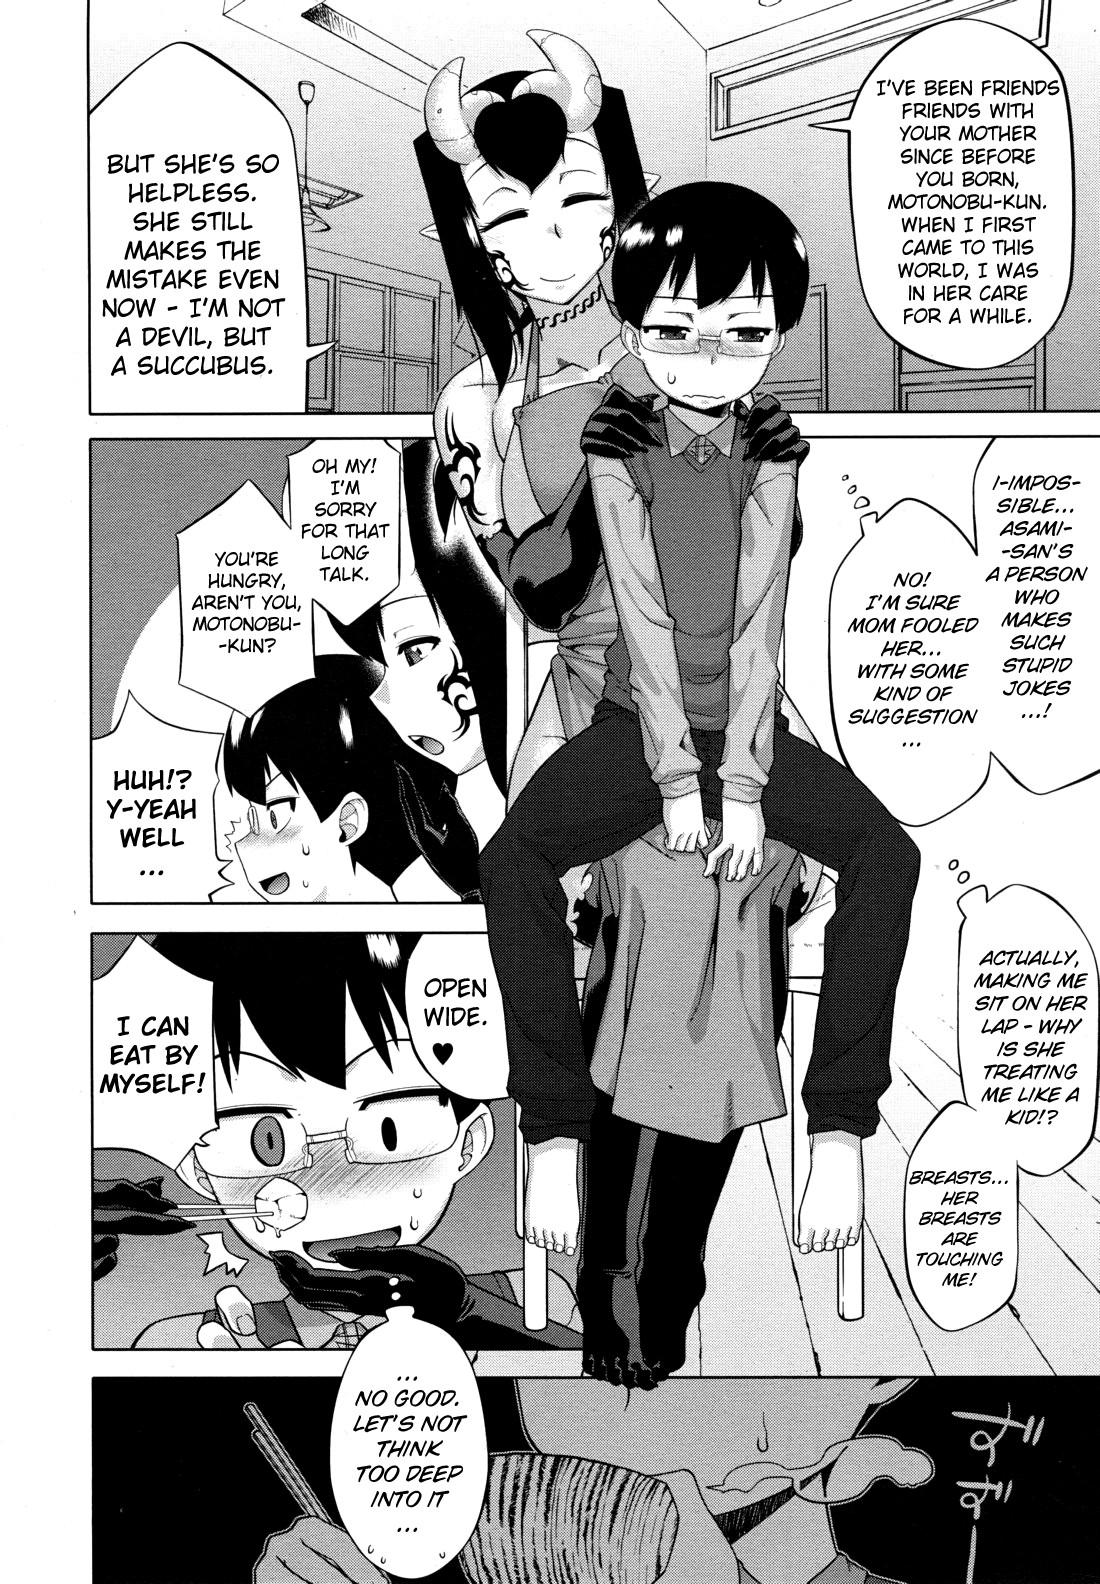 The Succubus Lady From Next Door Ch. 1-3 5